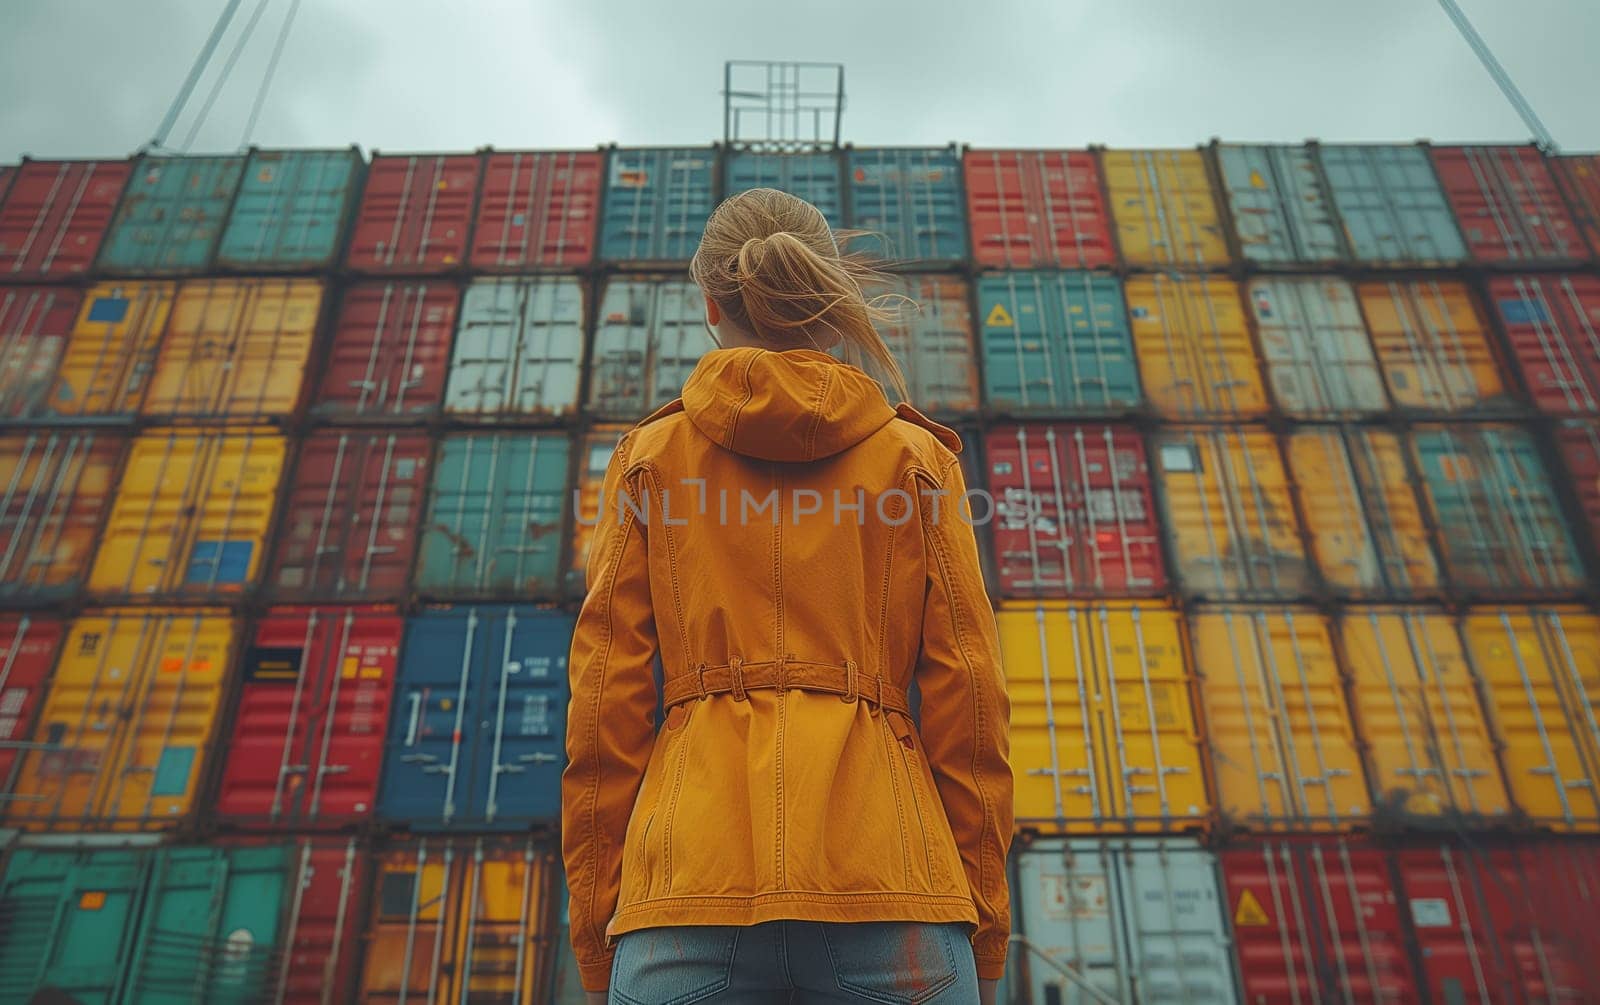 A woman in a vibrant magenta jacket stands in front of a wall of shipping containers, creating a striking visual arts composition with bold symmetry and patterns